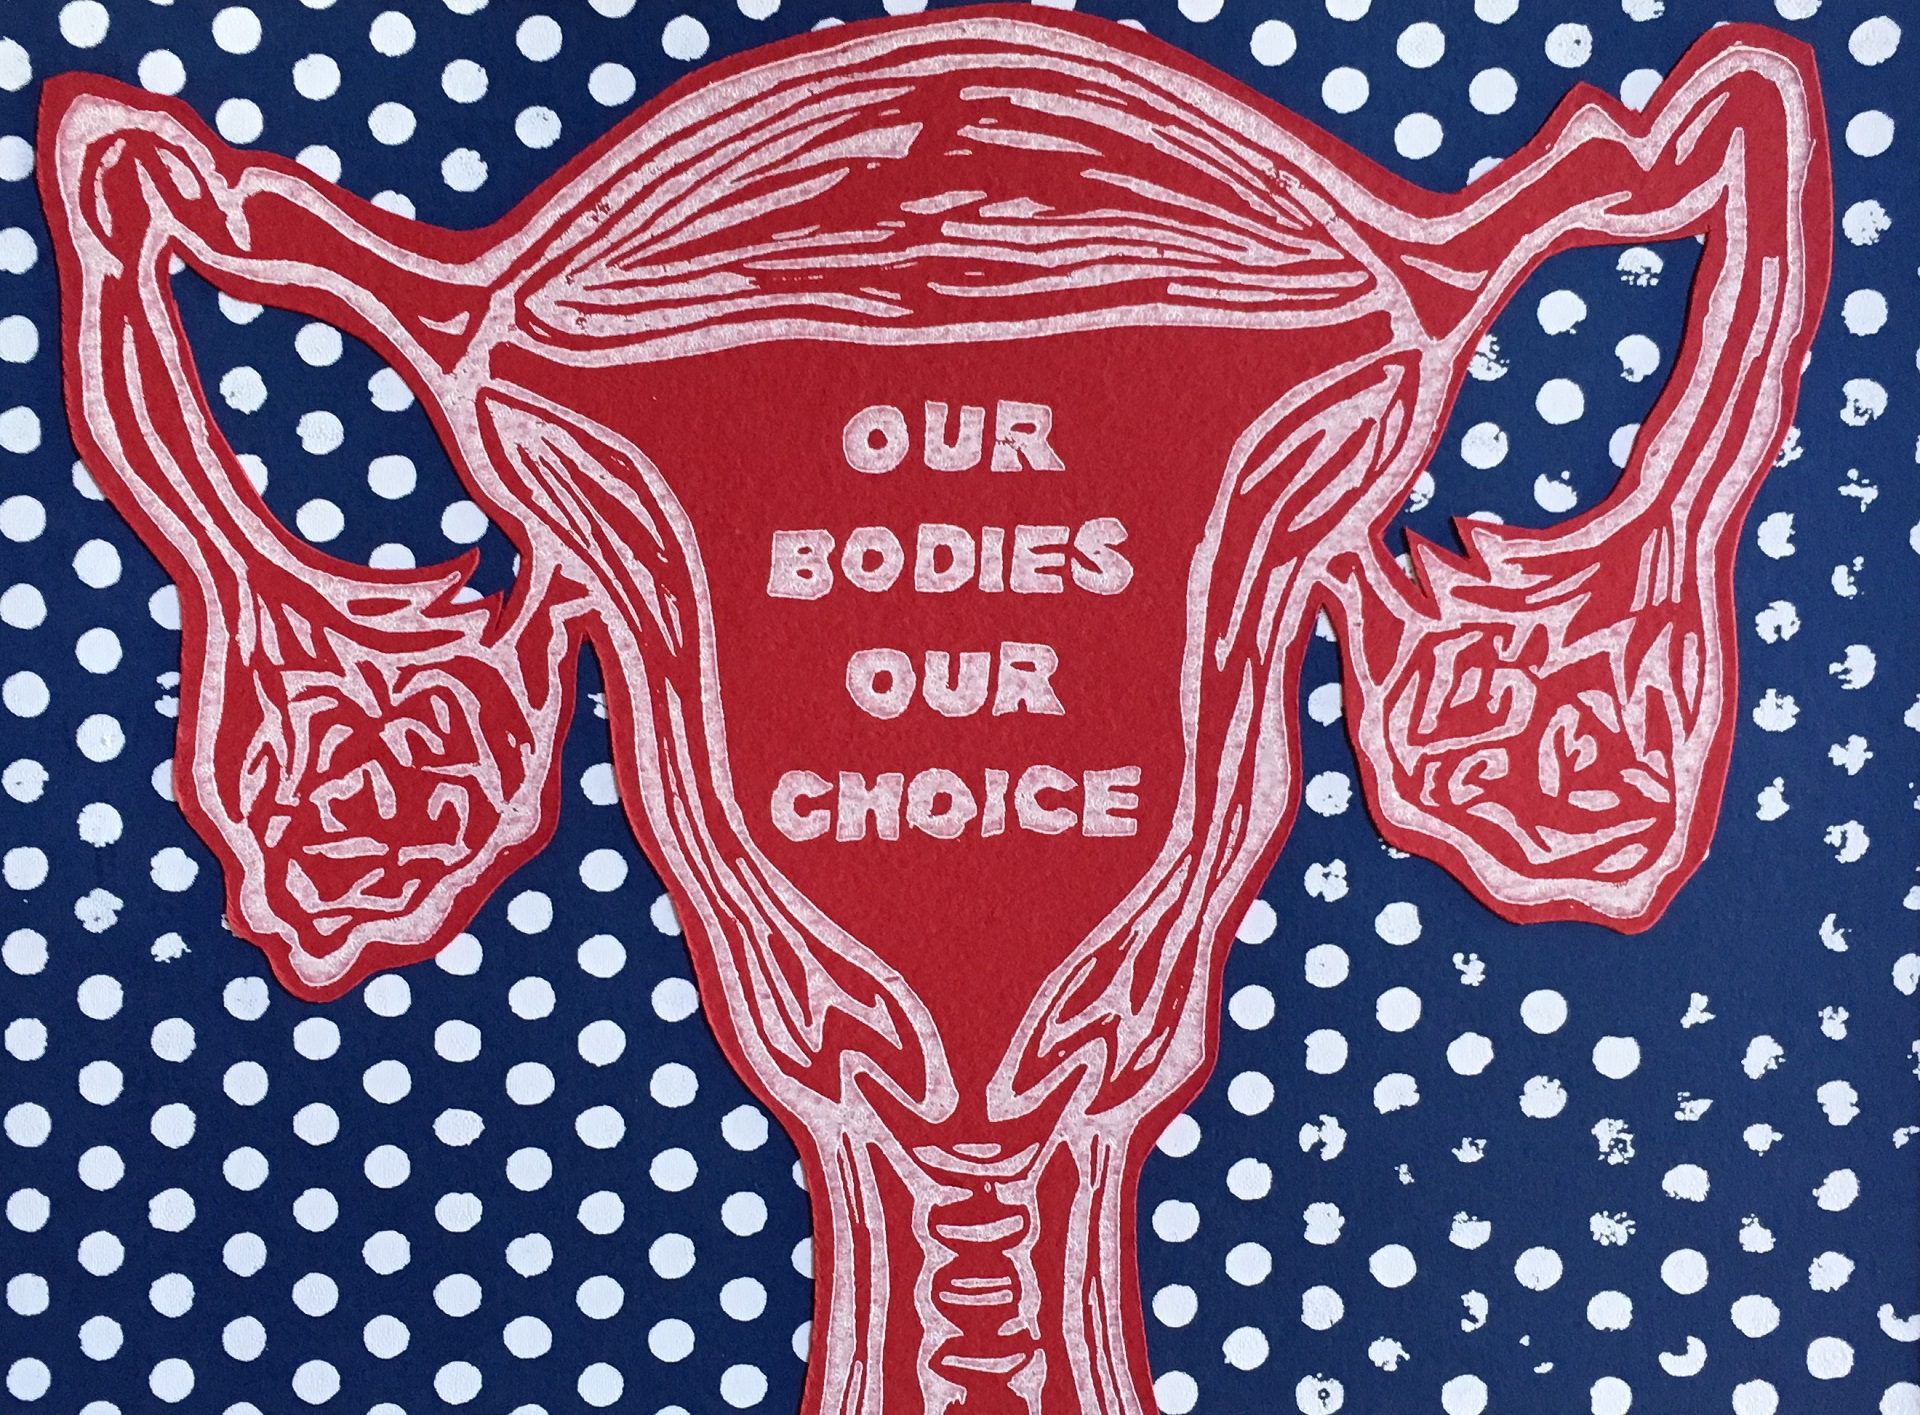 "Our Bodies Our Choice" by Kelly Witte 